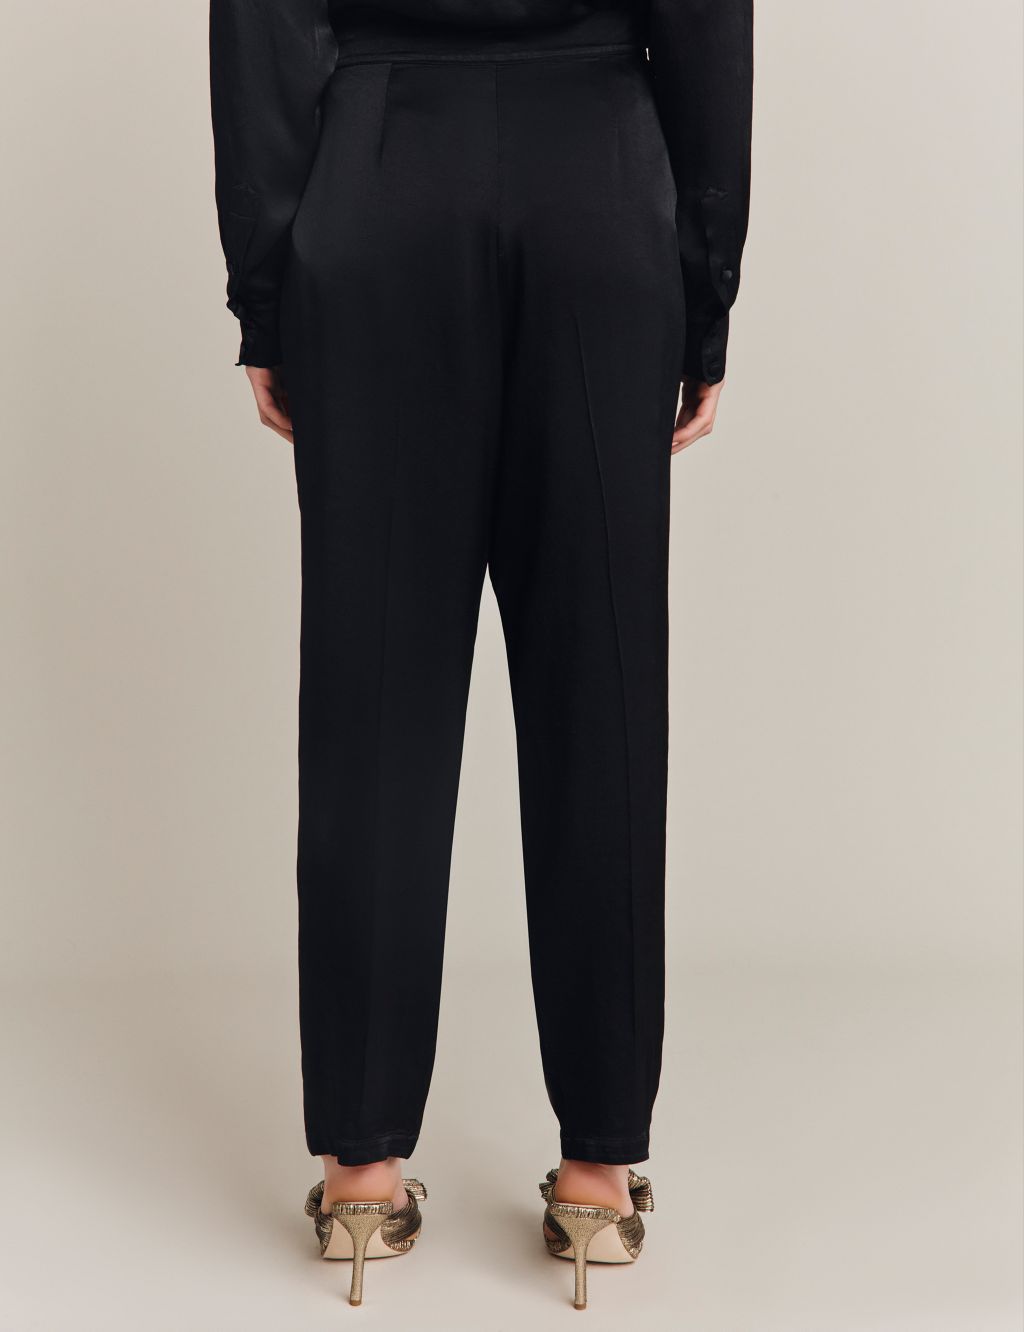 Satin Pleat Front Tapered Trousers image 3